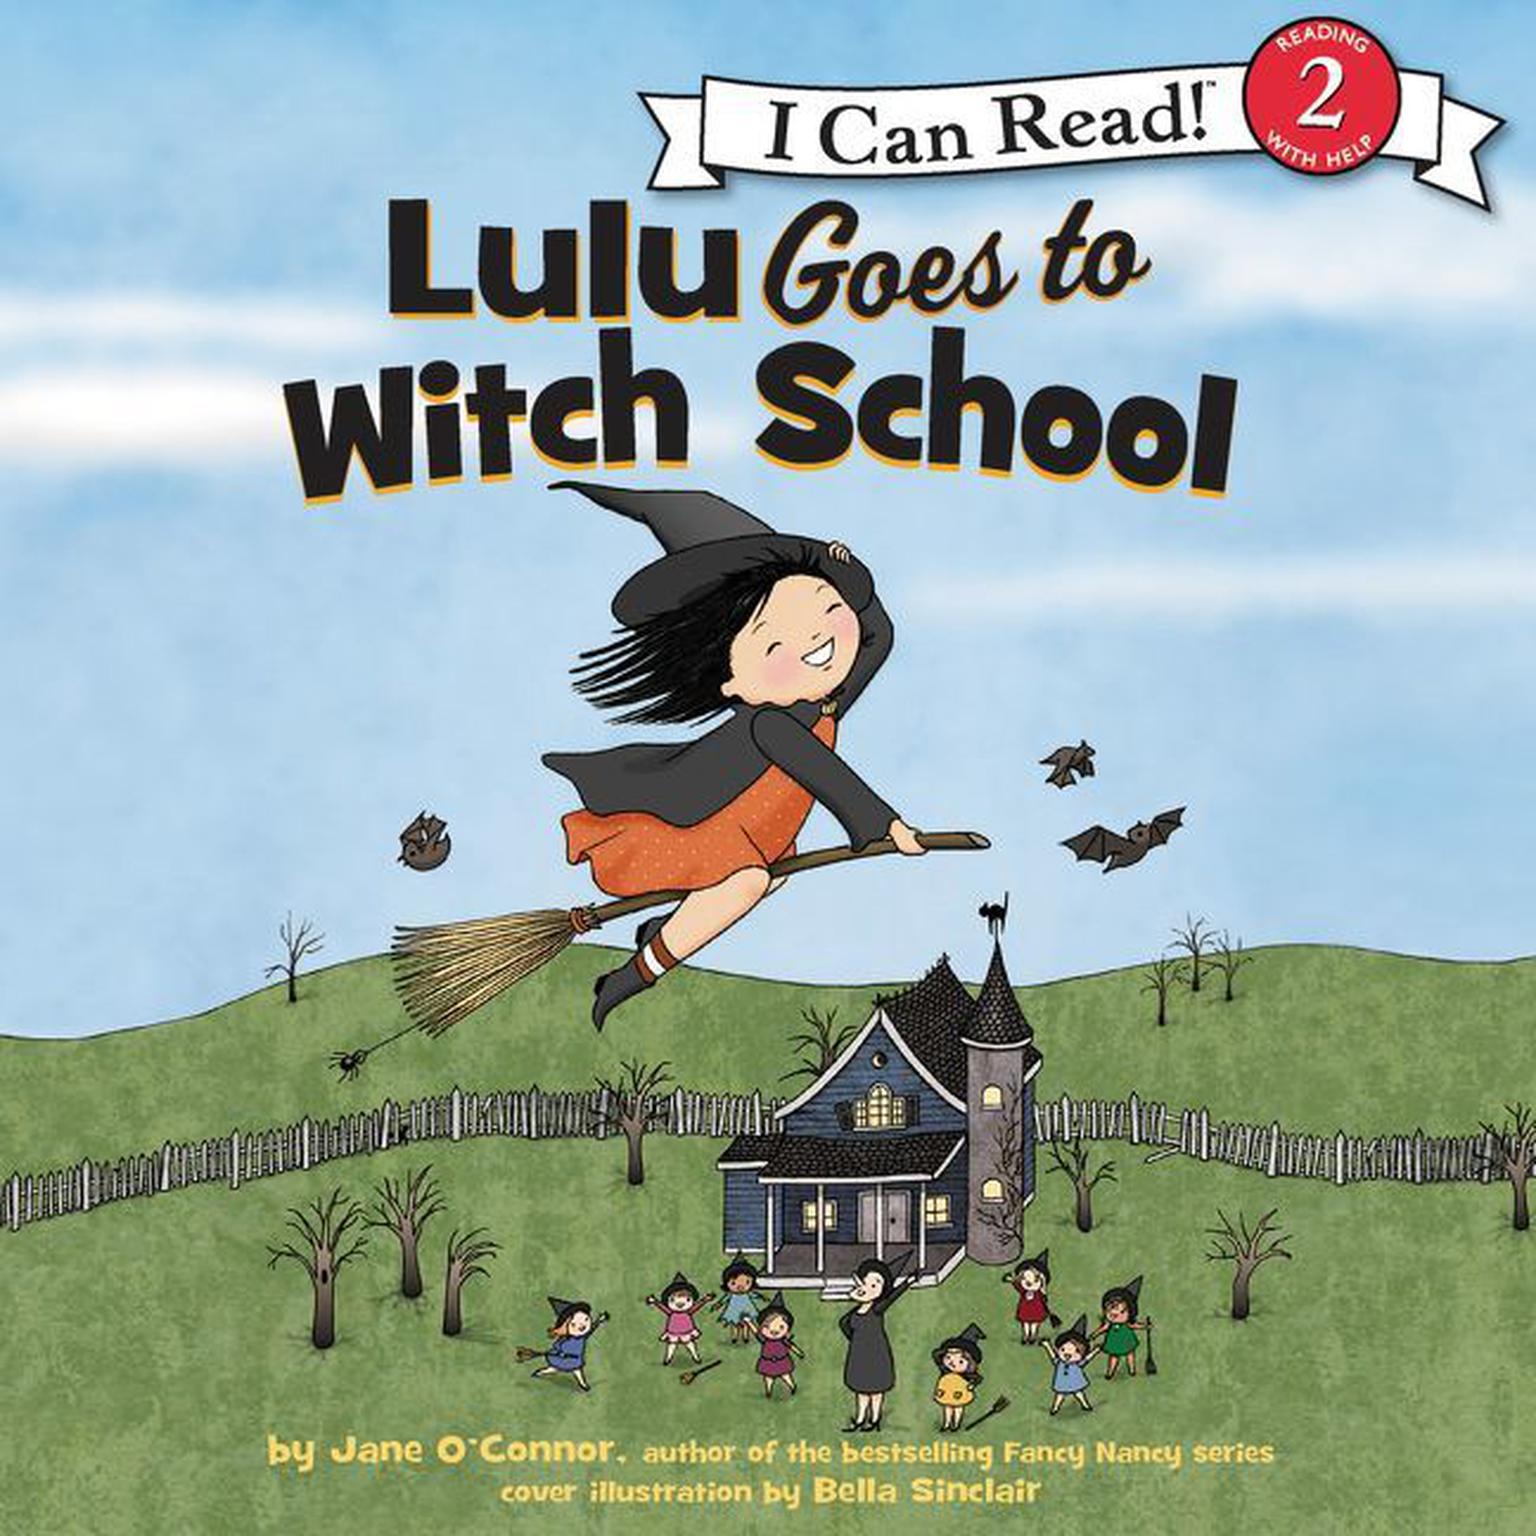 Lulu Goes to Witch School Audiobook, by Jane O’Connor